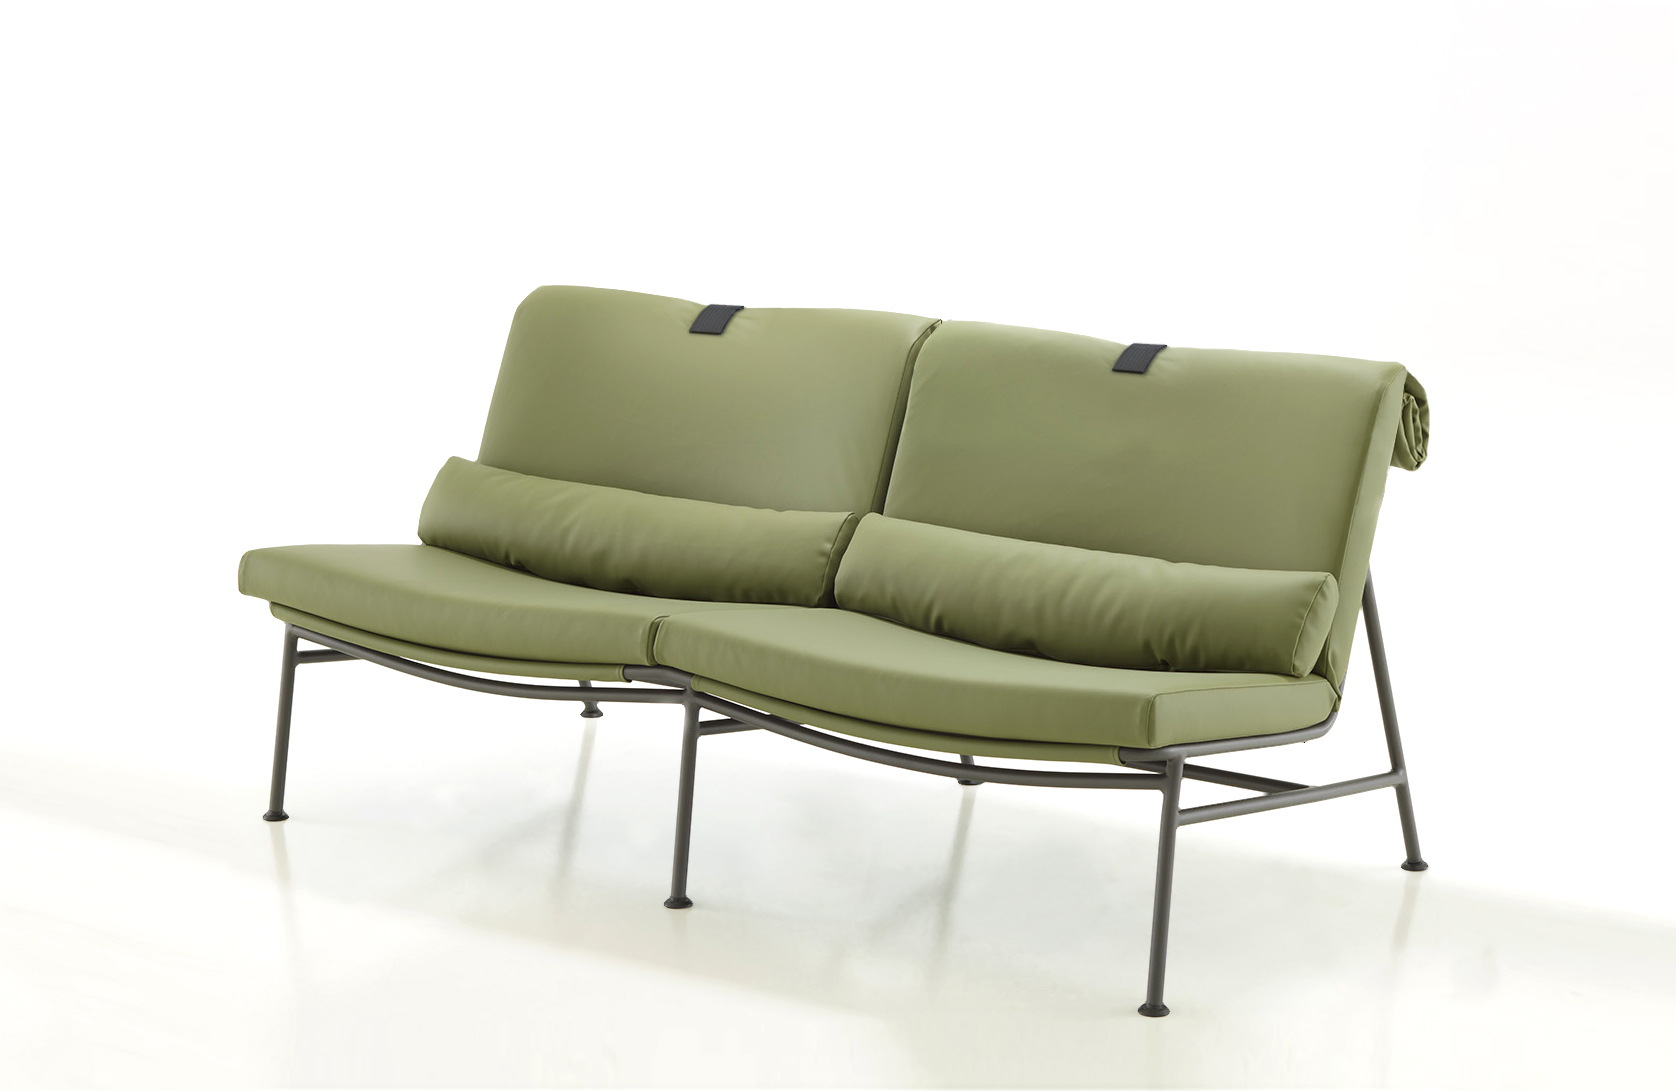 Backpack Outdoor Seating Collection by LucidiPevere for Ligne Roset